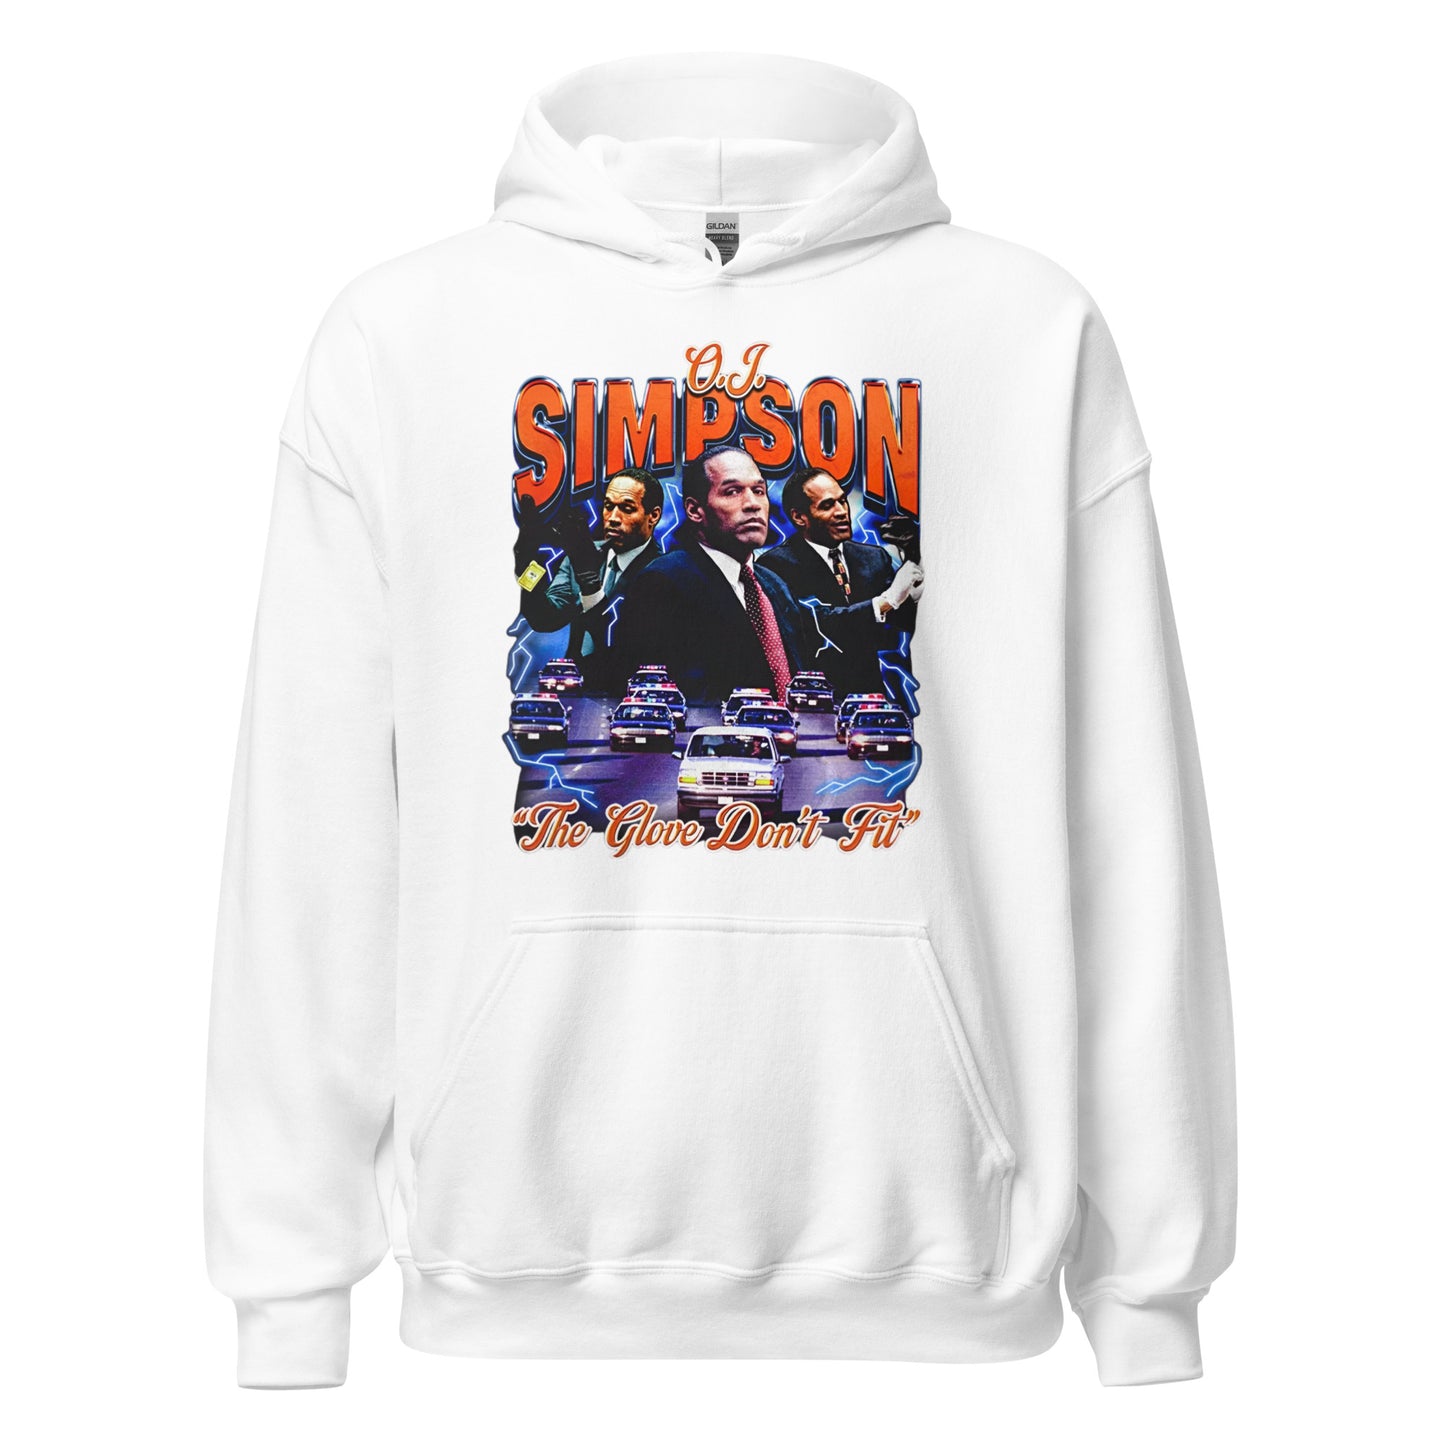 O.J. Simpson "The Glove Don't Fit" Hoodie ❄️